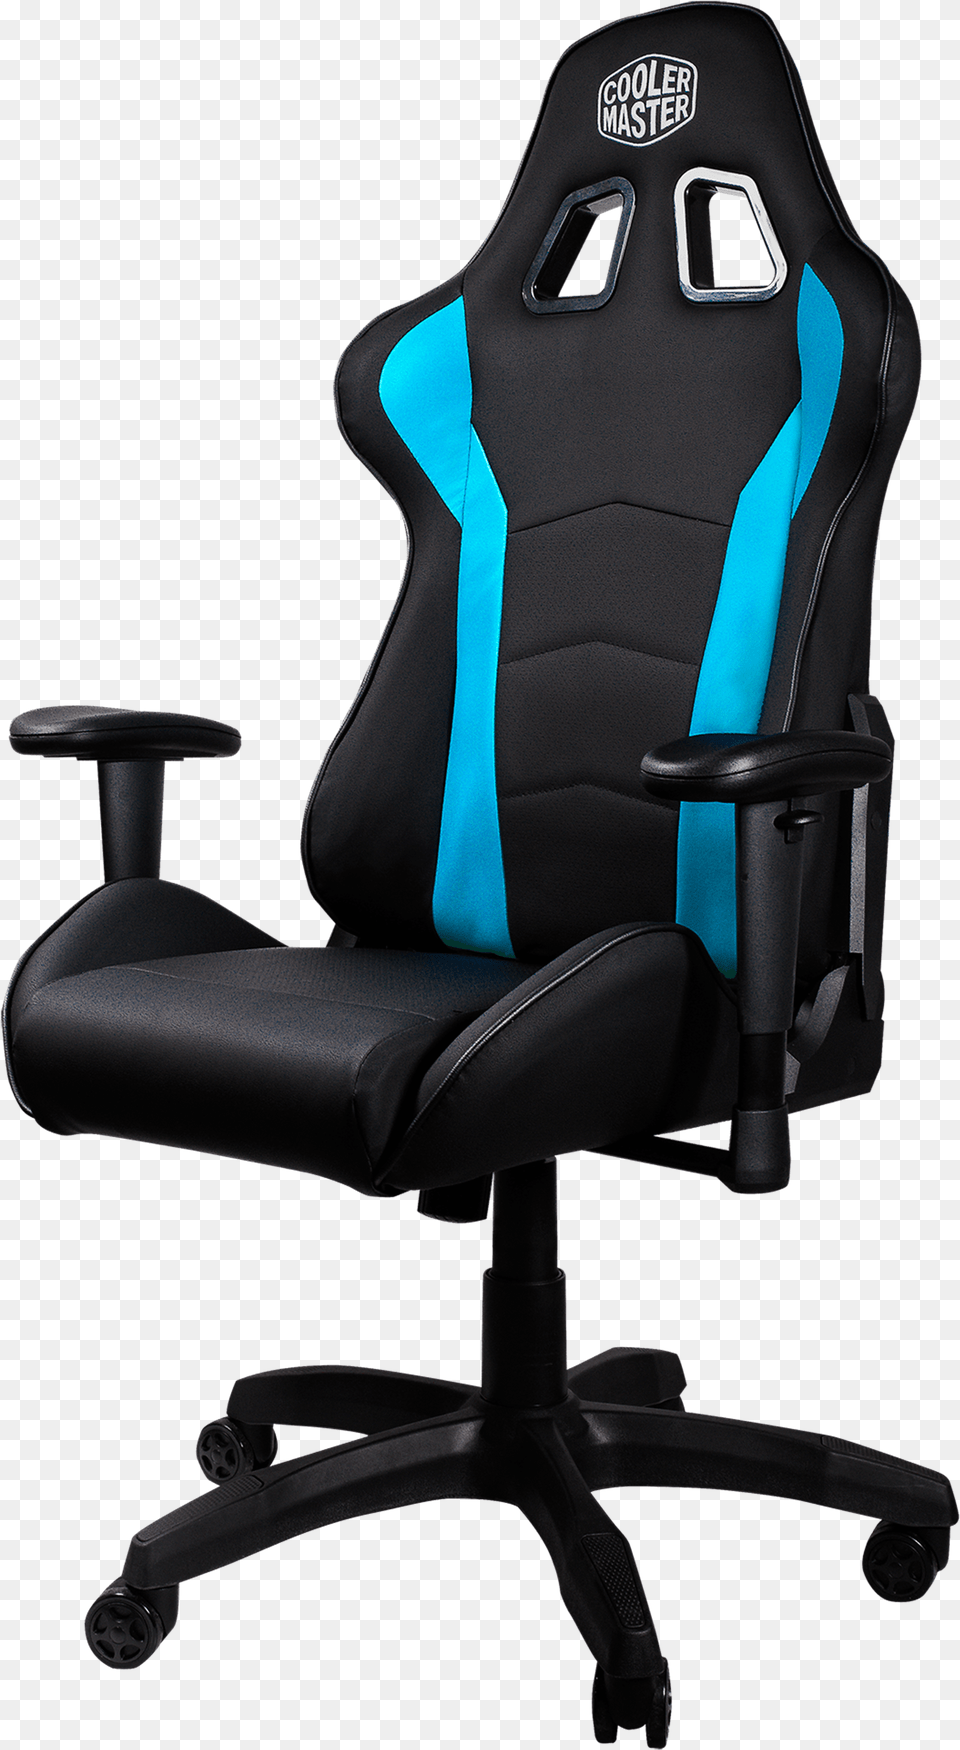 Cooler Master Caliber R1 Gaming Chair, Dynamite, Weapon Free Transparent Png